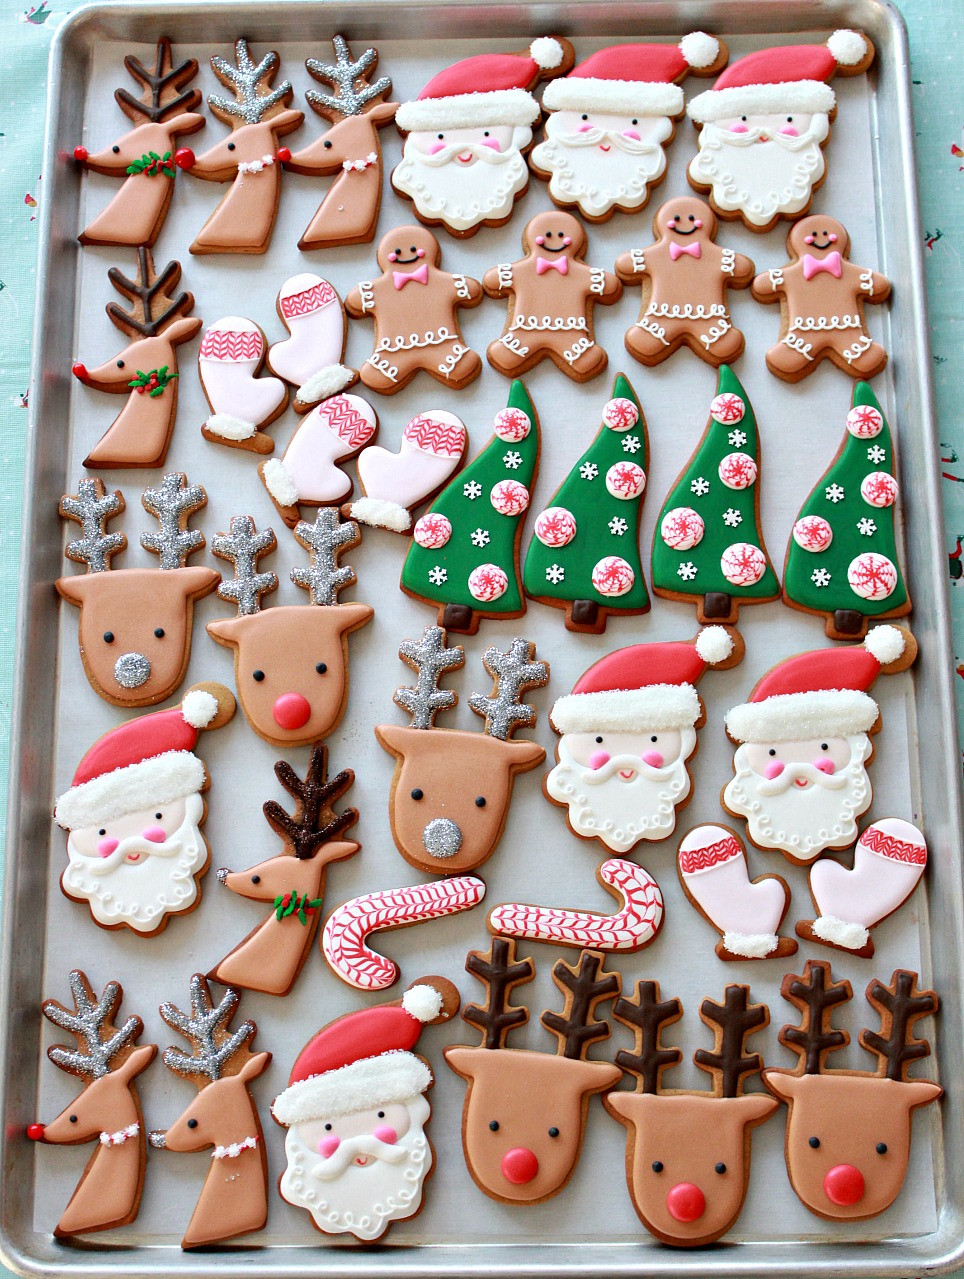 Christmas Cookies Decorating
 Video How to Decorate Christmas Cookies Simple Designs